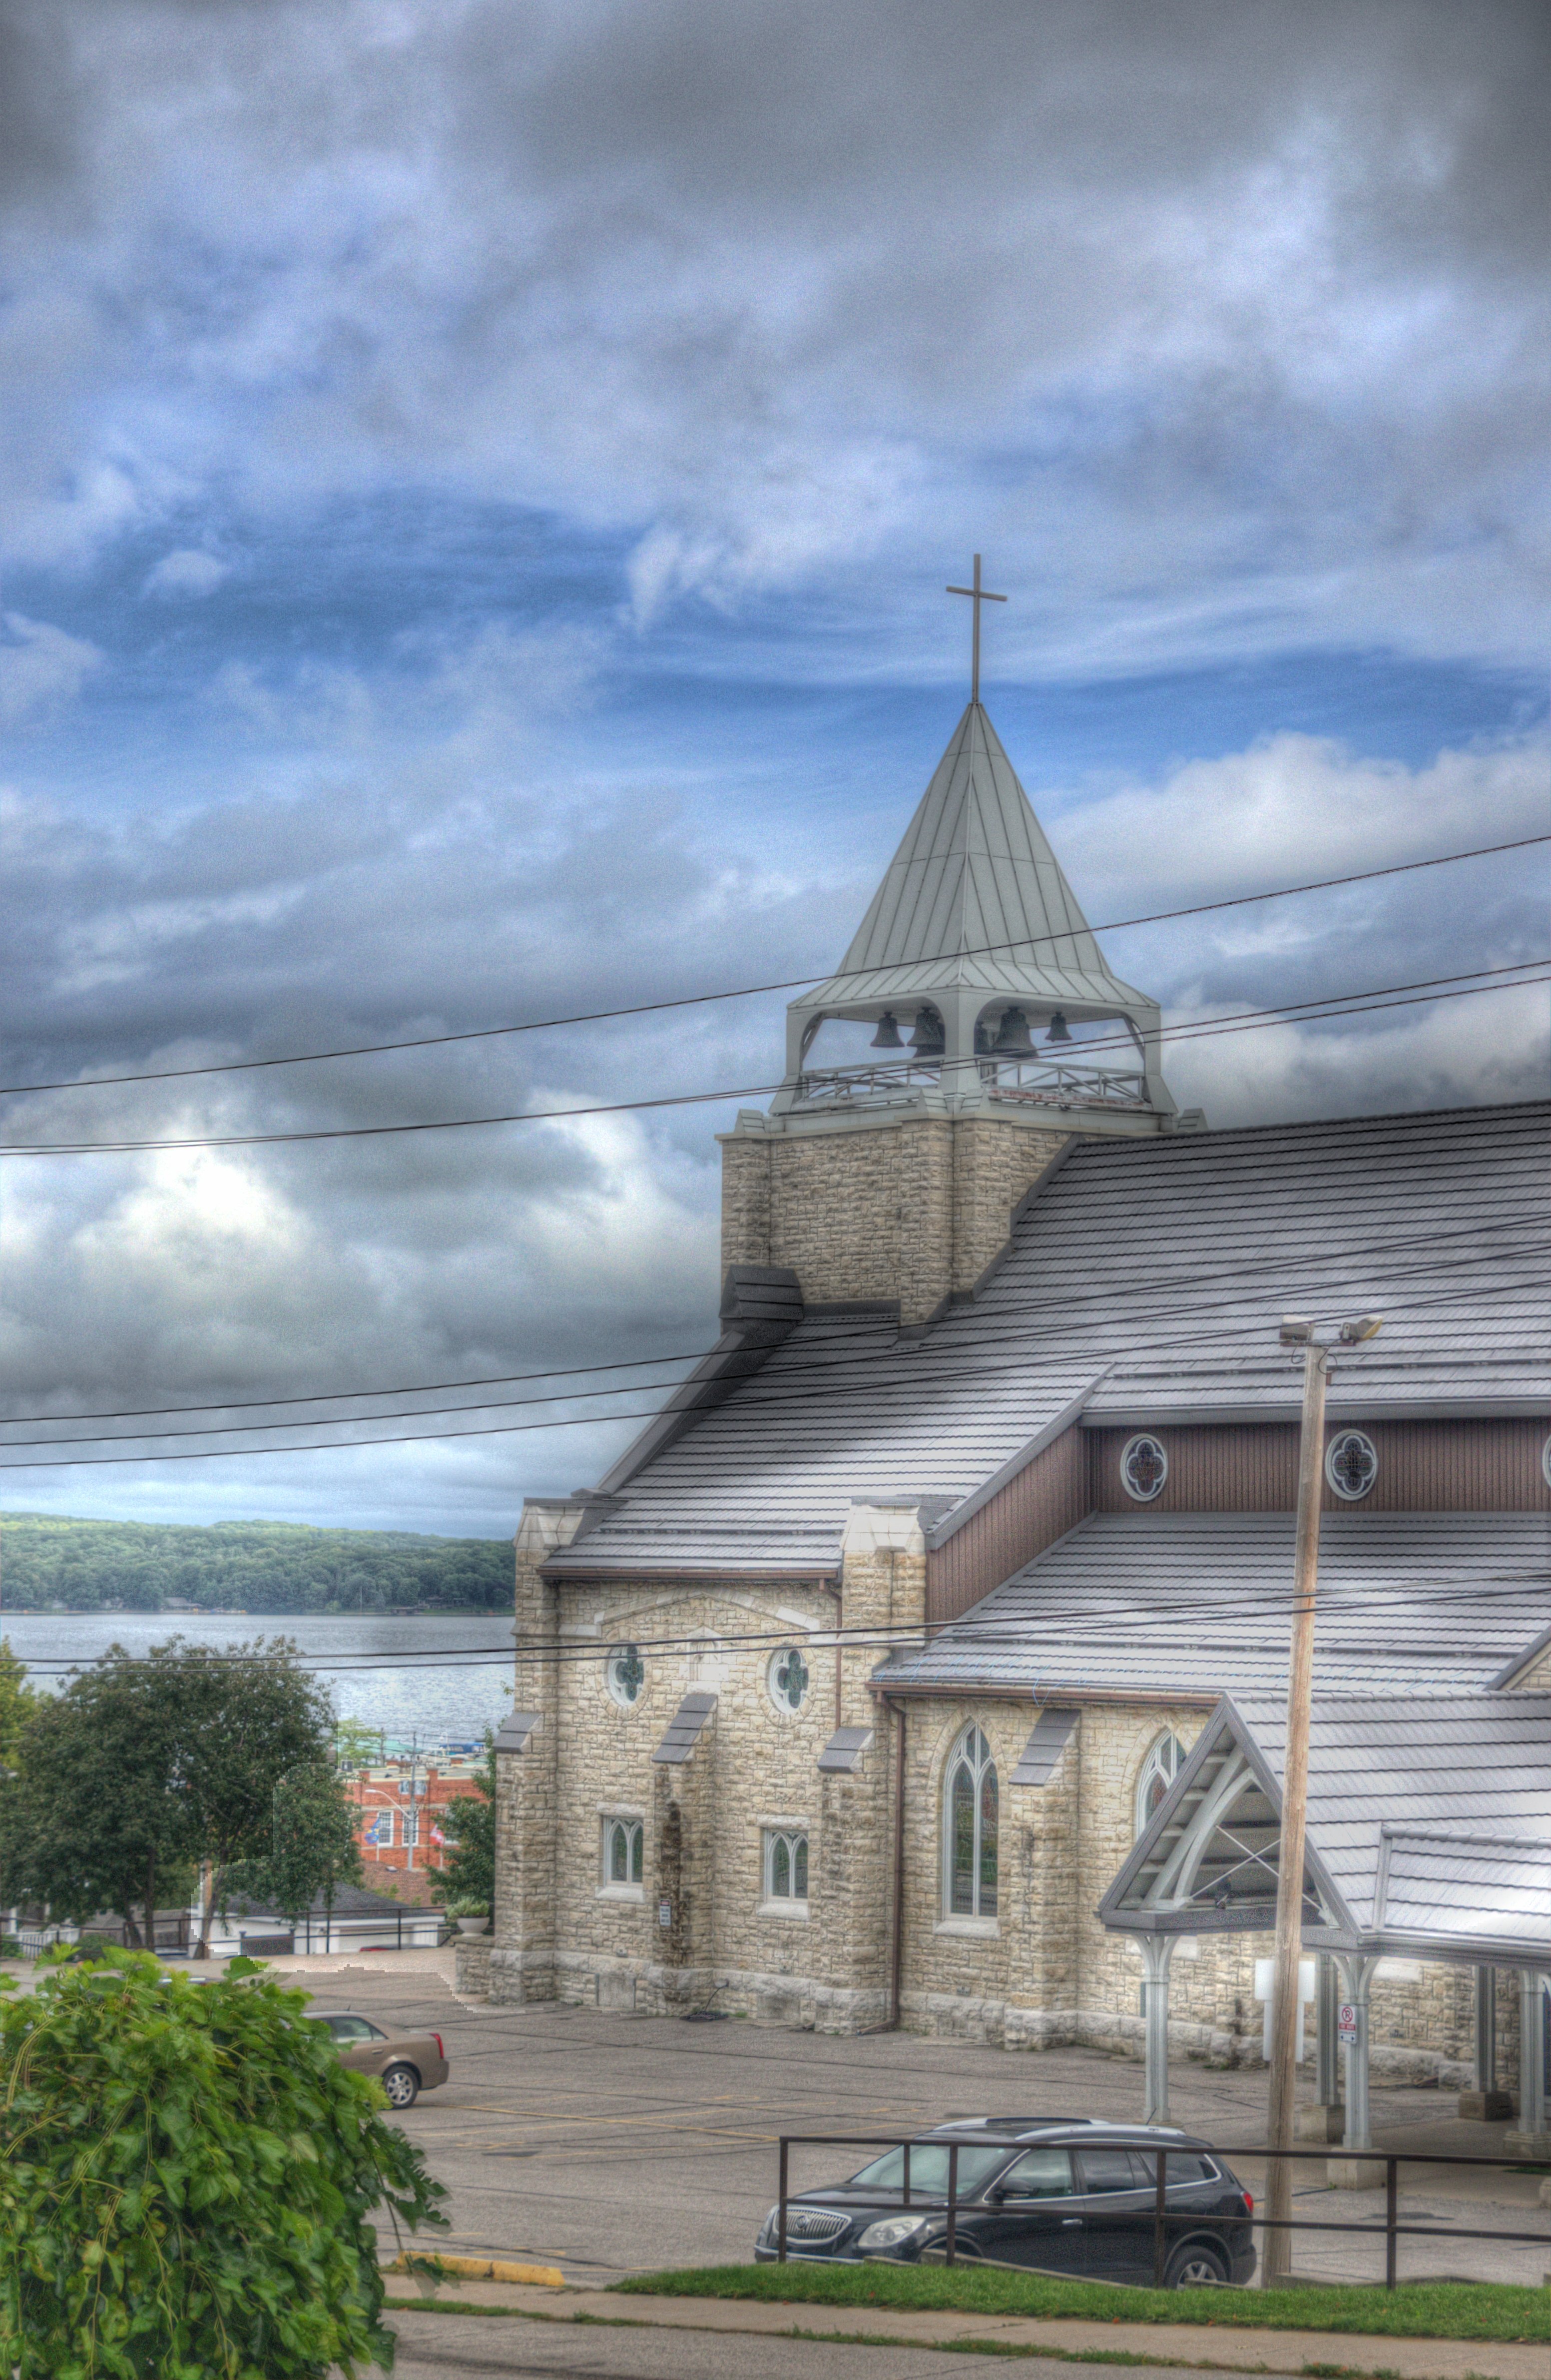 Outside image of St. Margaret's Bell tower from the view of Third St. a view of Georgian Bay and beautiful clouds in the sky.